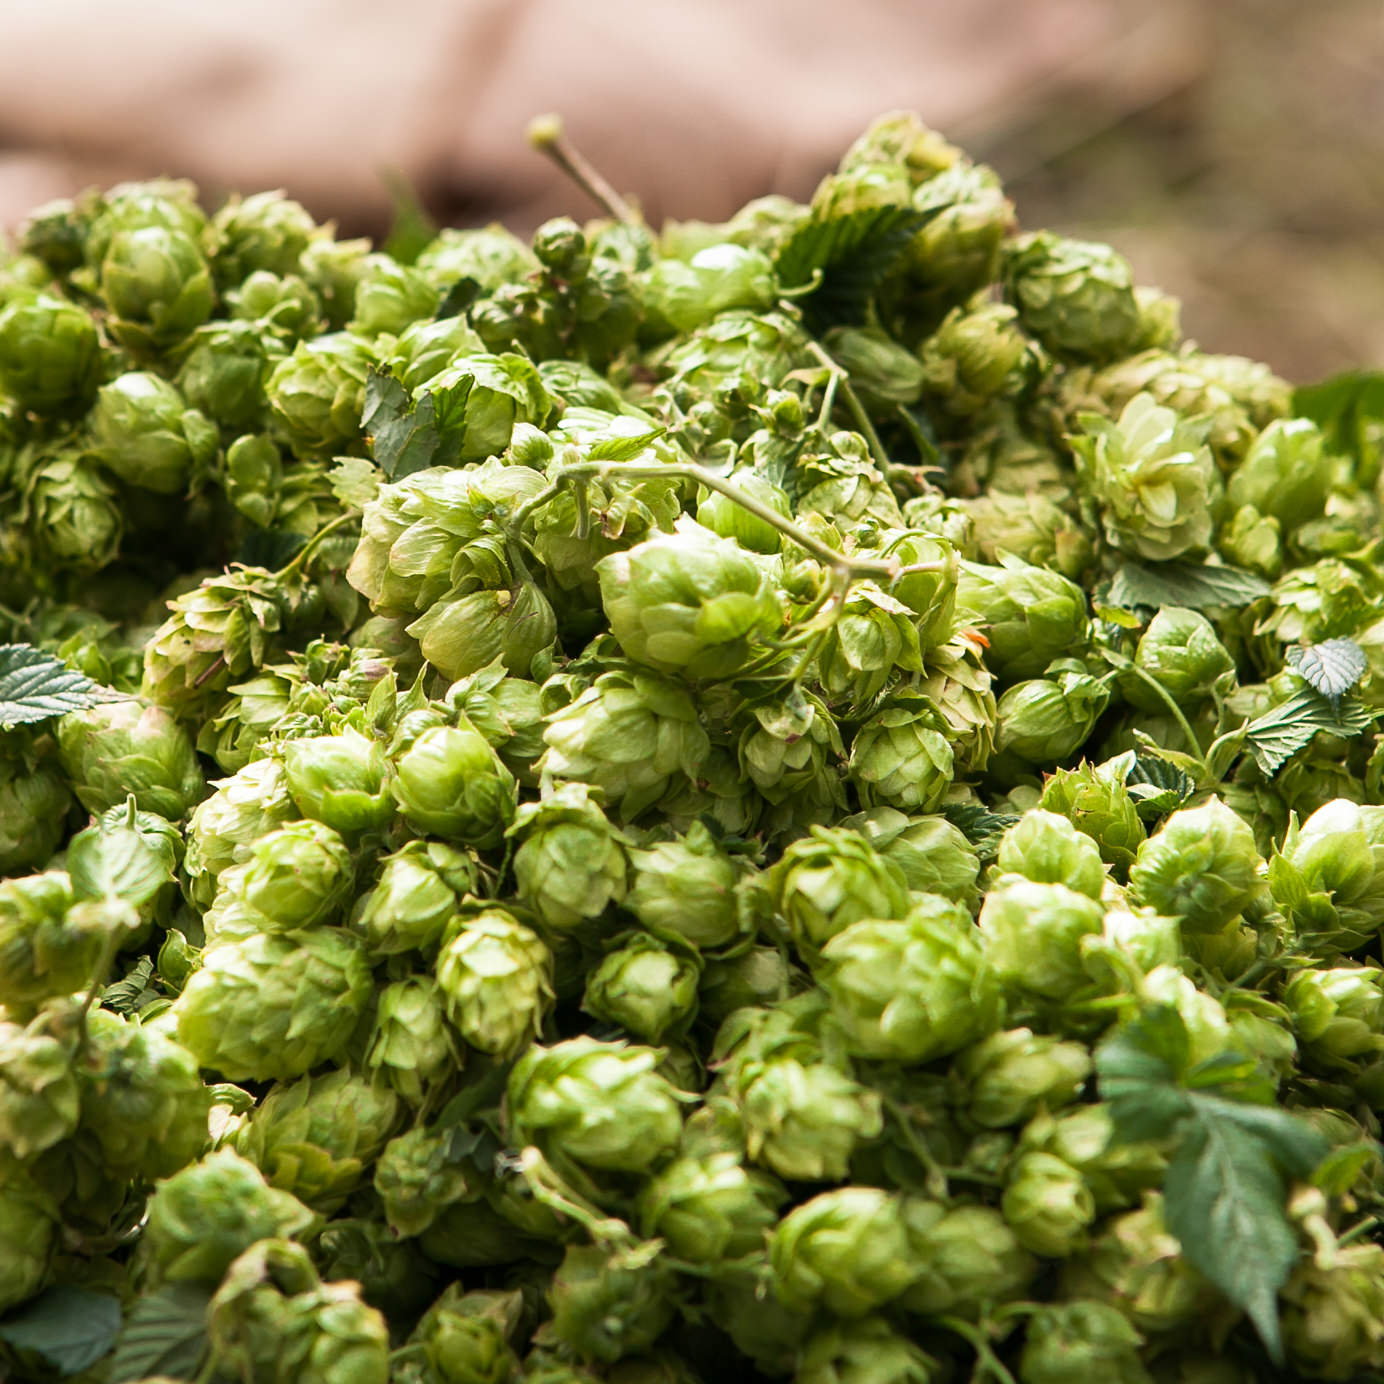 These Are the Chemical Compounds That Make Beer Taste So Good